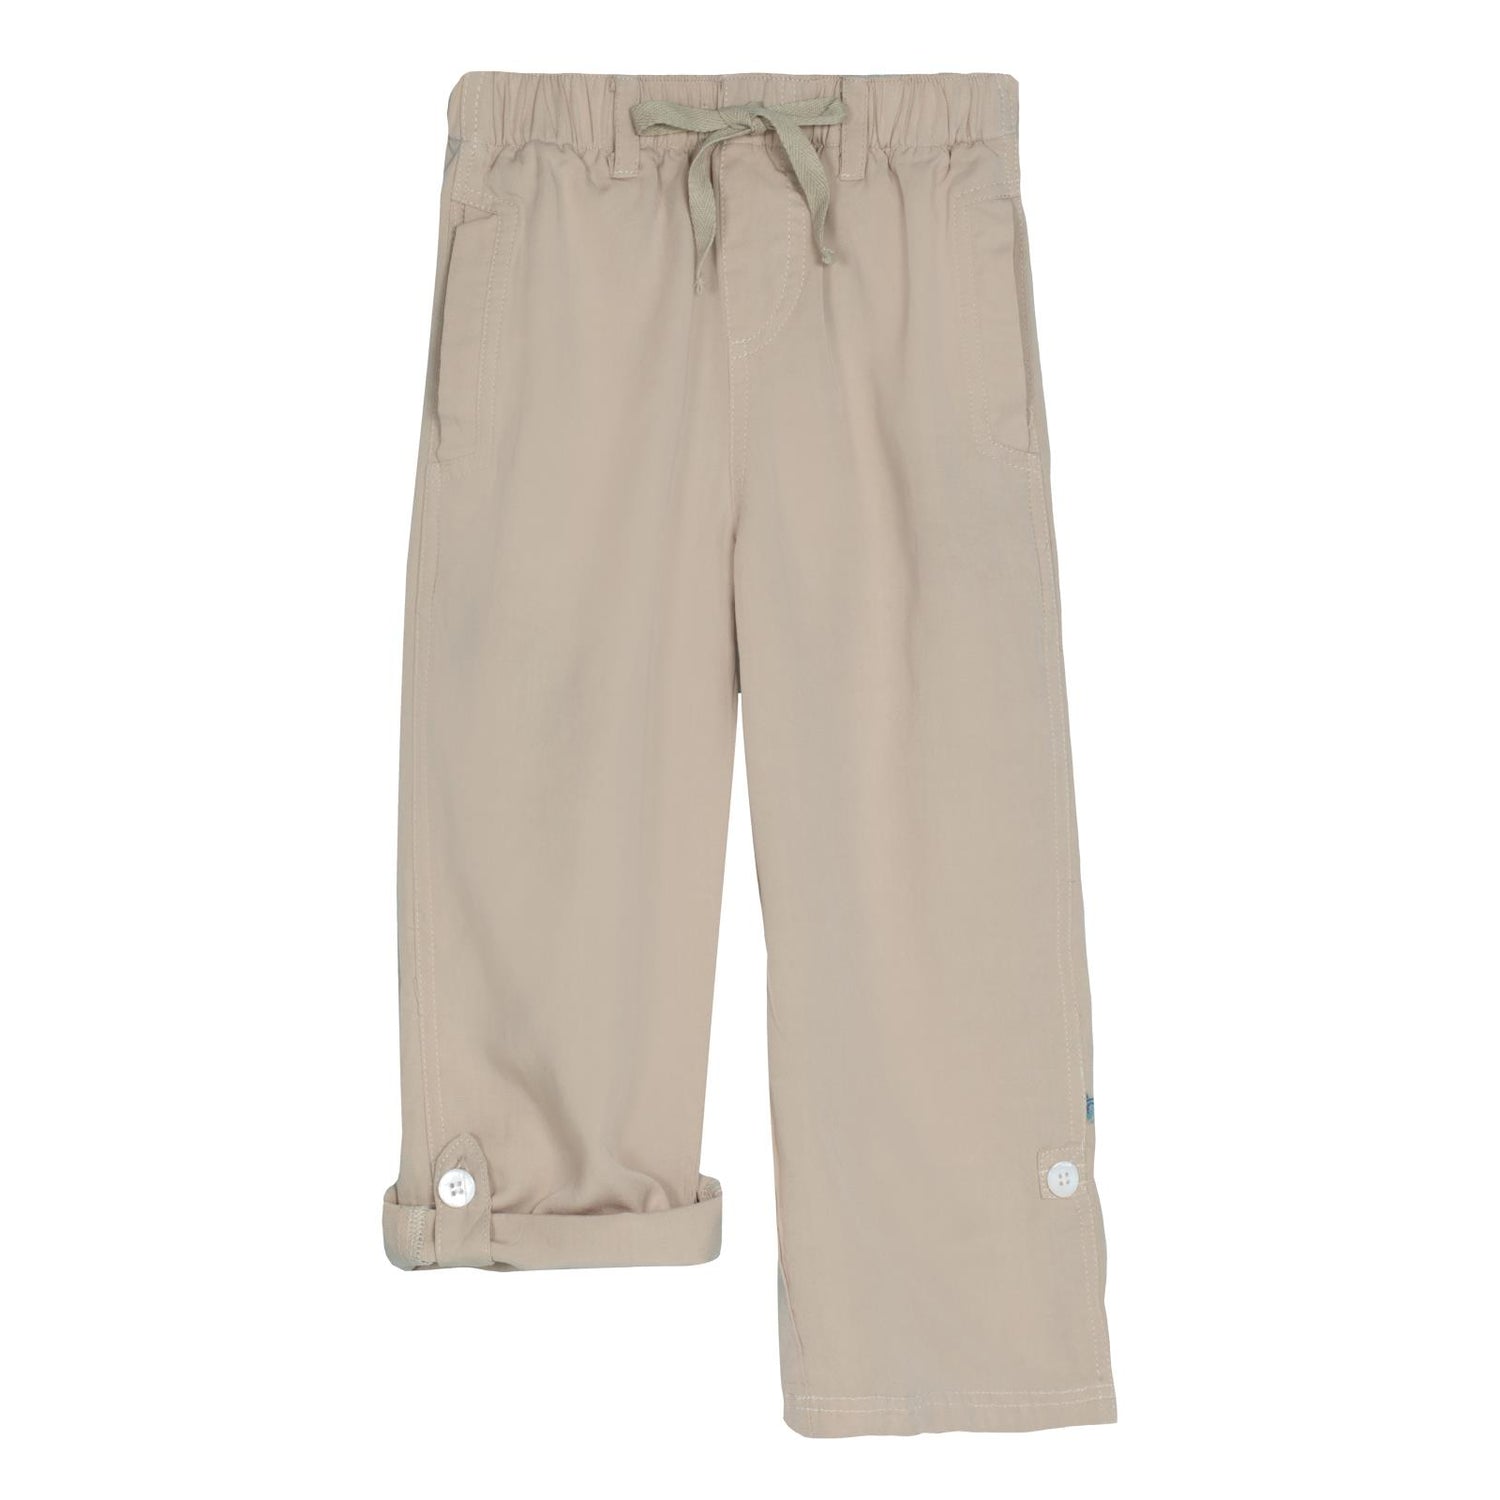 Woven Roll-Up Pants in Burlap